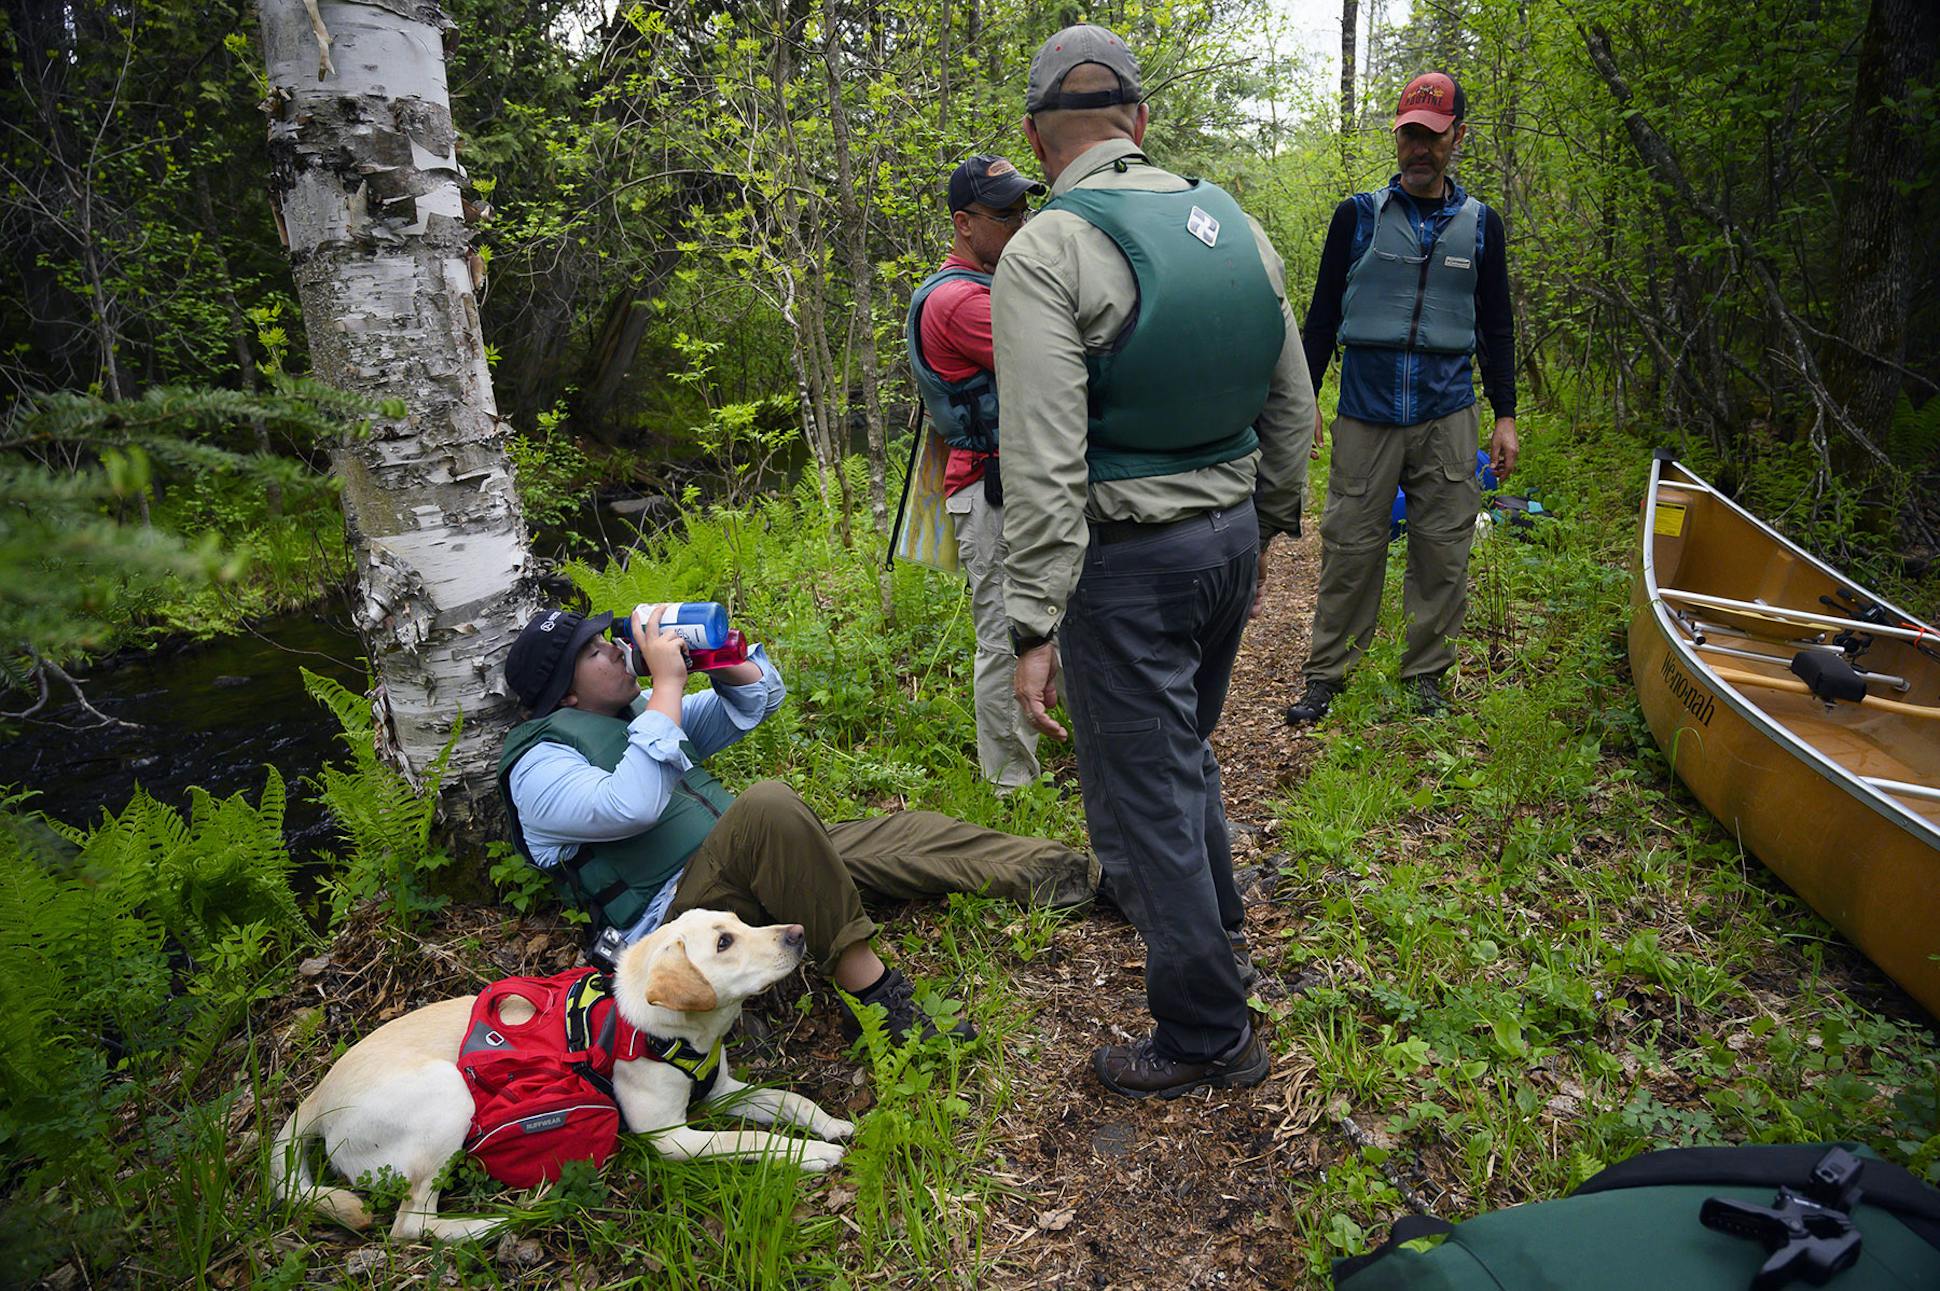 The group caught its breath and took water about half-way through the 660-rod Long Portage.